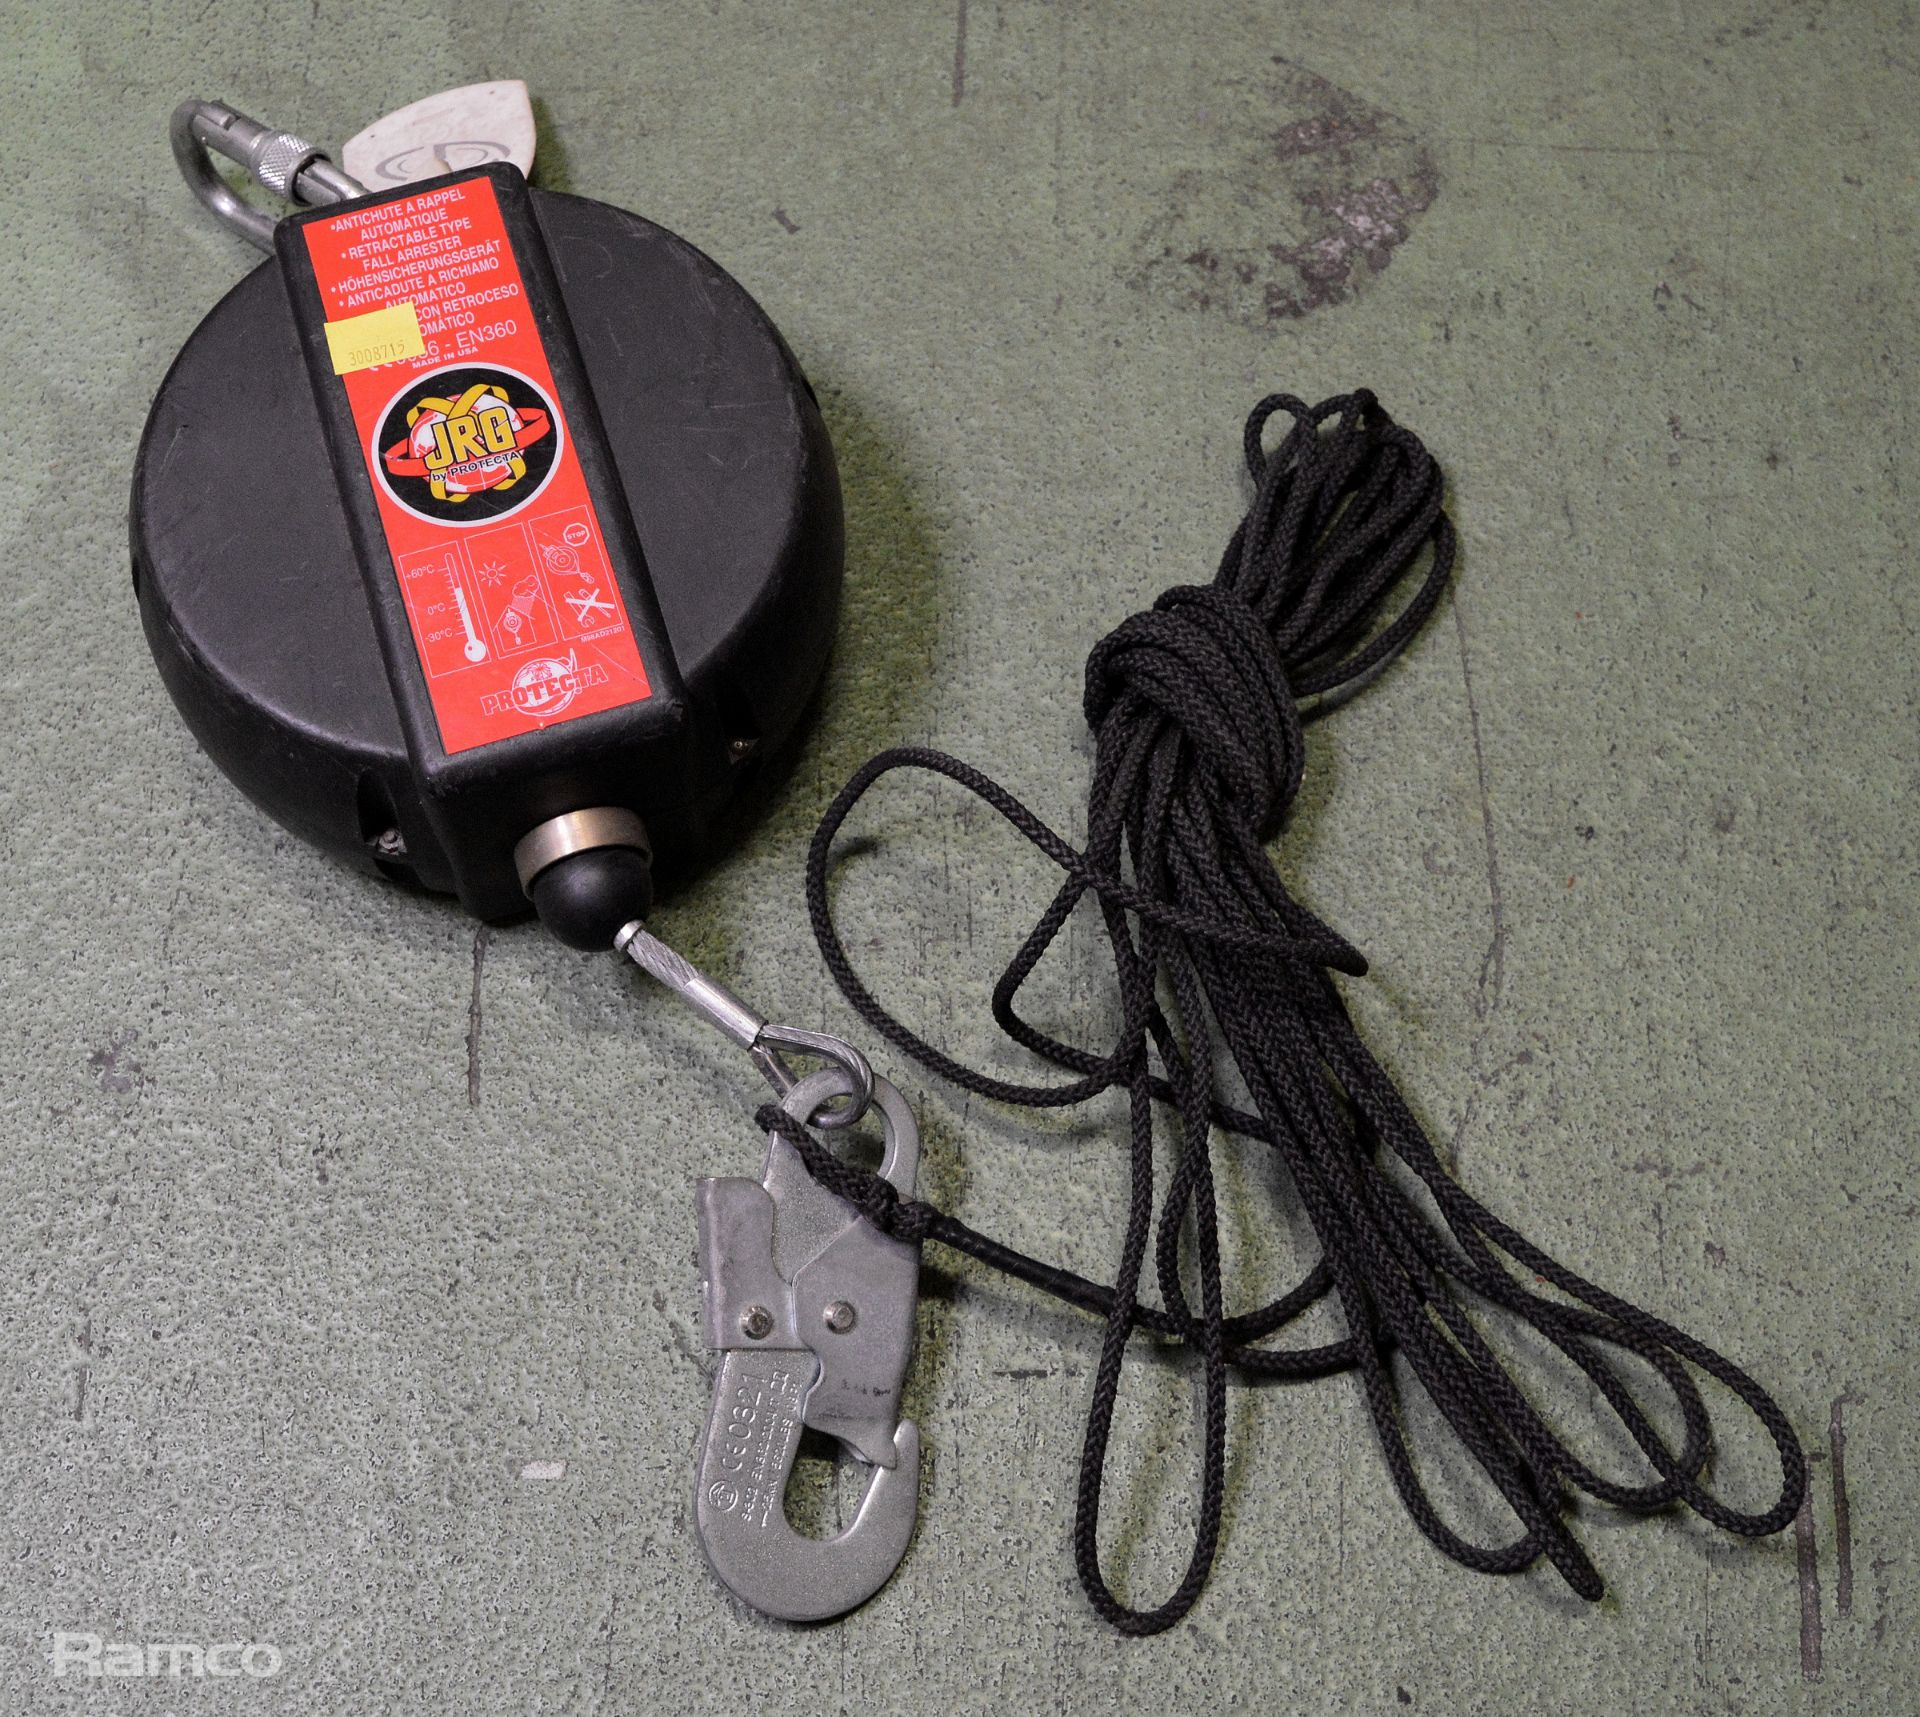 Protecta JRG Fall Arrest Safety Device